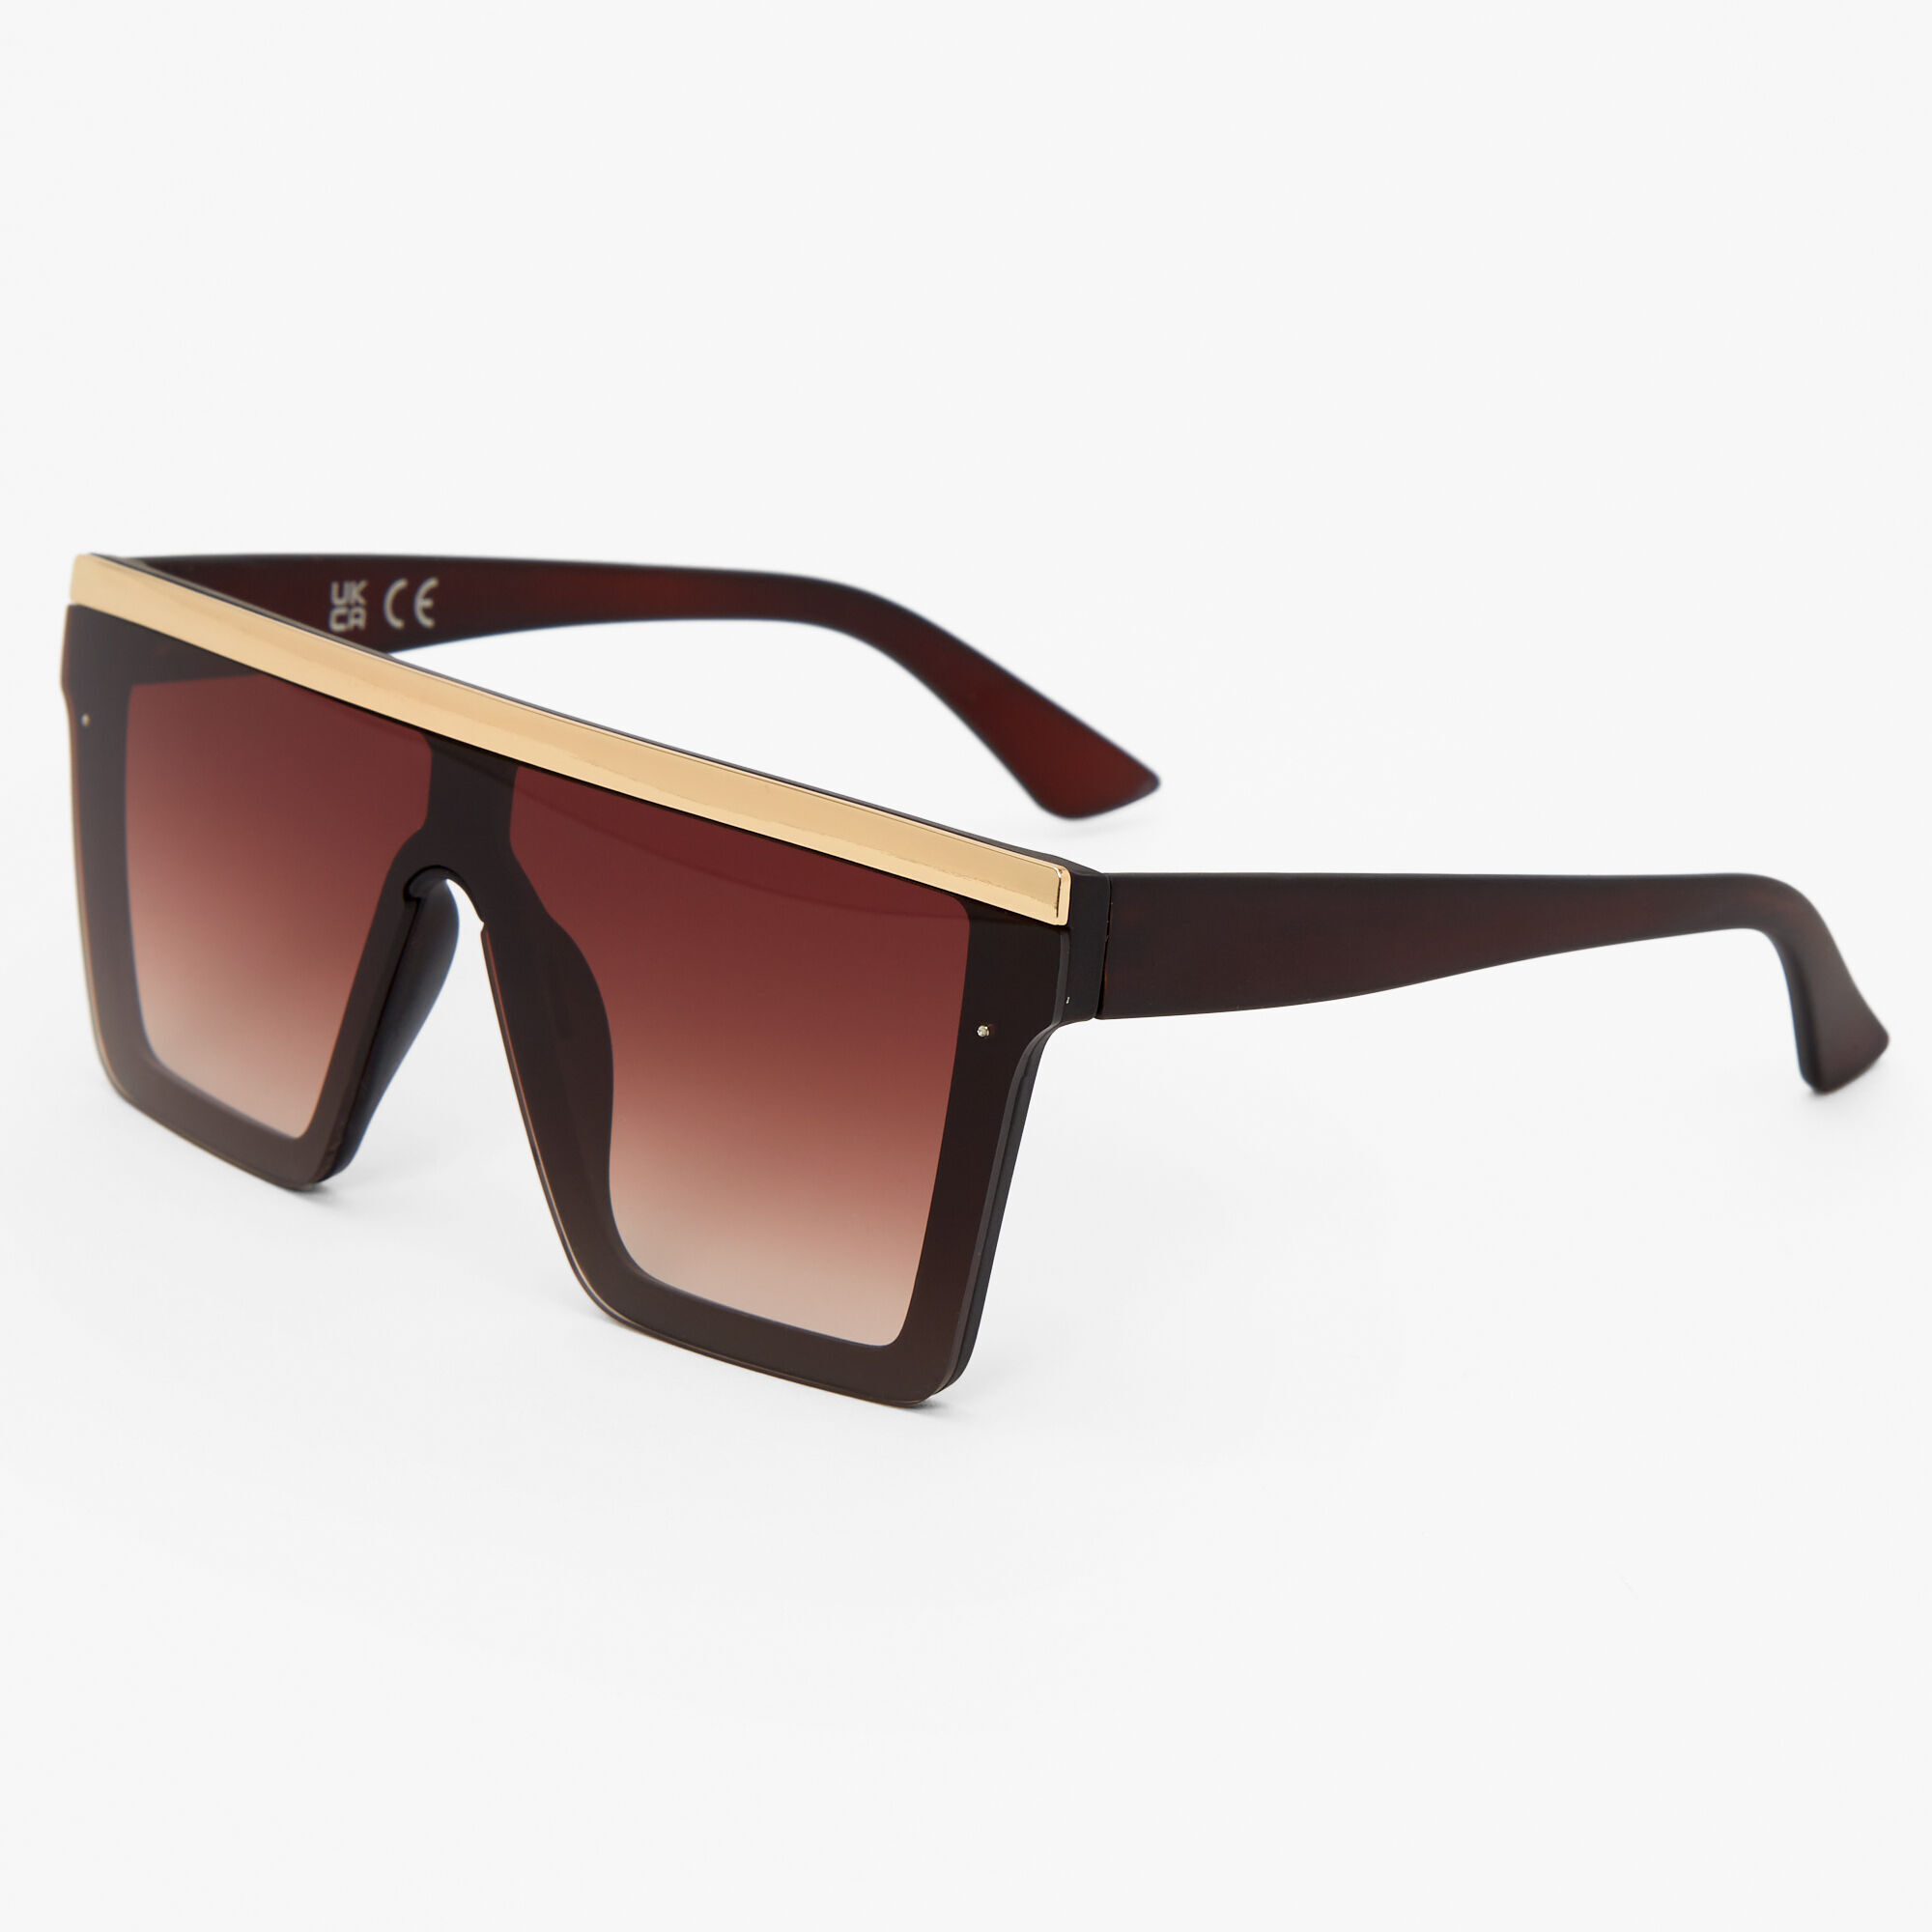 View Claires Gold Bar Shield Sunglasses Brown information